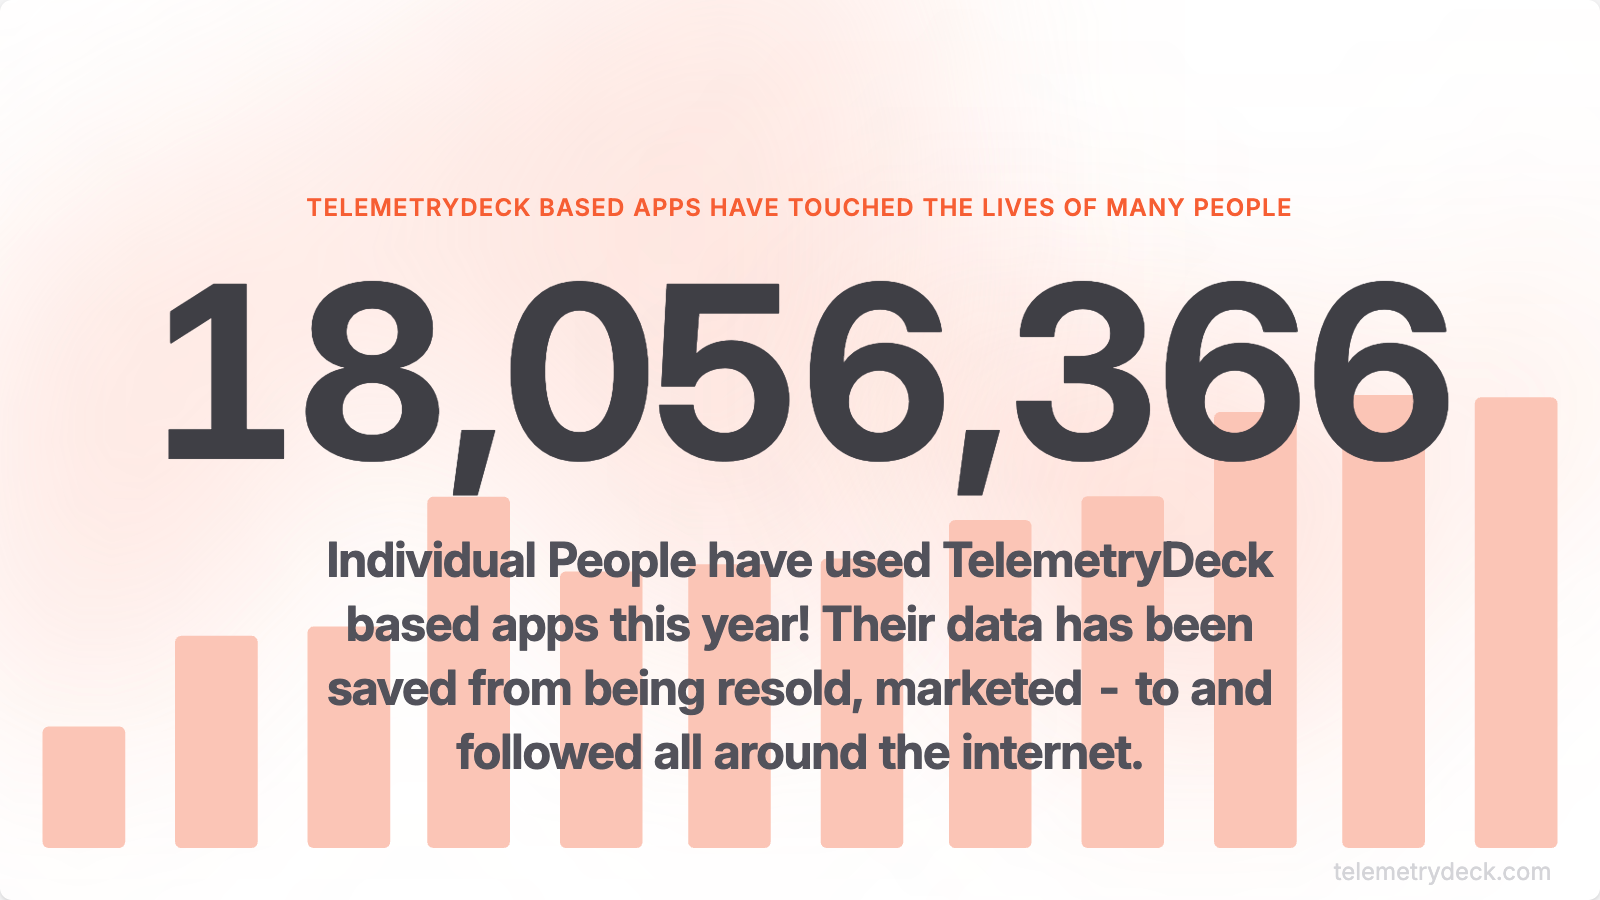 18,056,366 individual people have used TelemetryDeck based apps